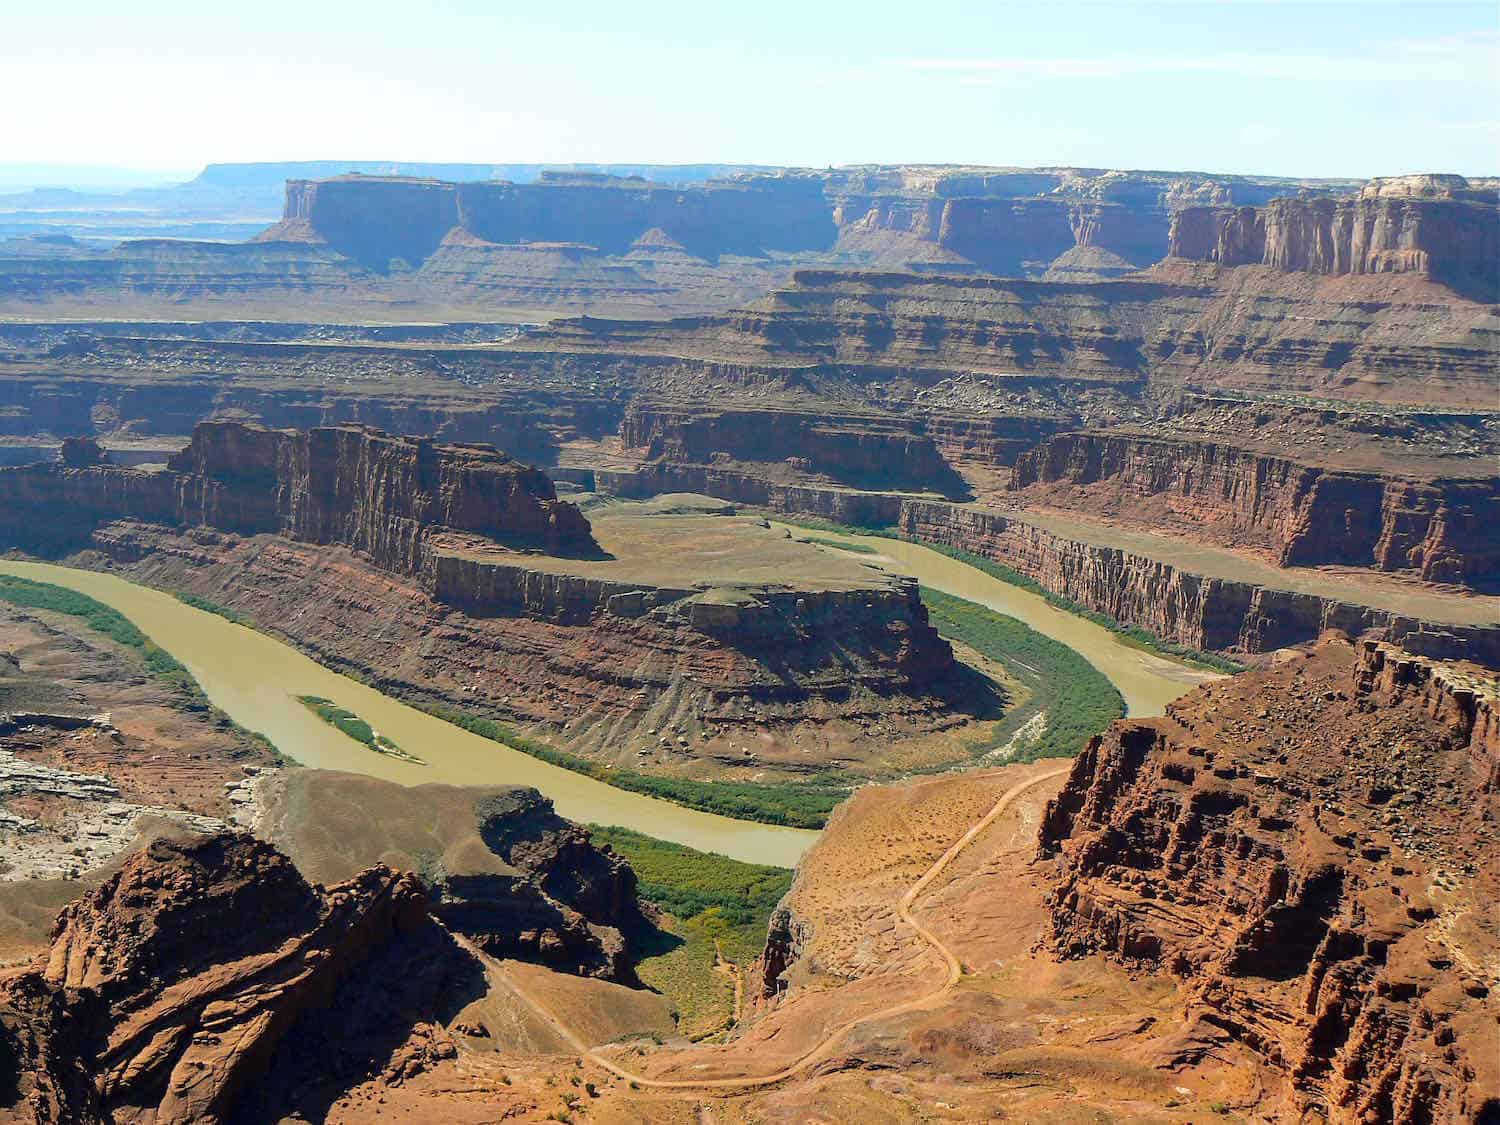 Muddy river winding through a canyon surrounded by cliffs at Dead Horse Point Overlook